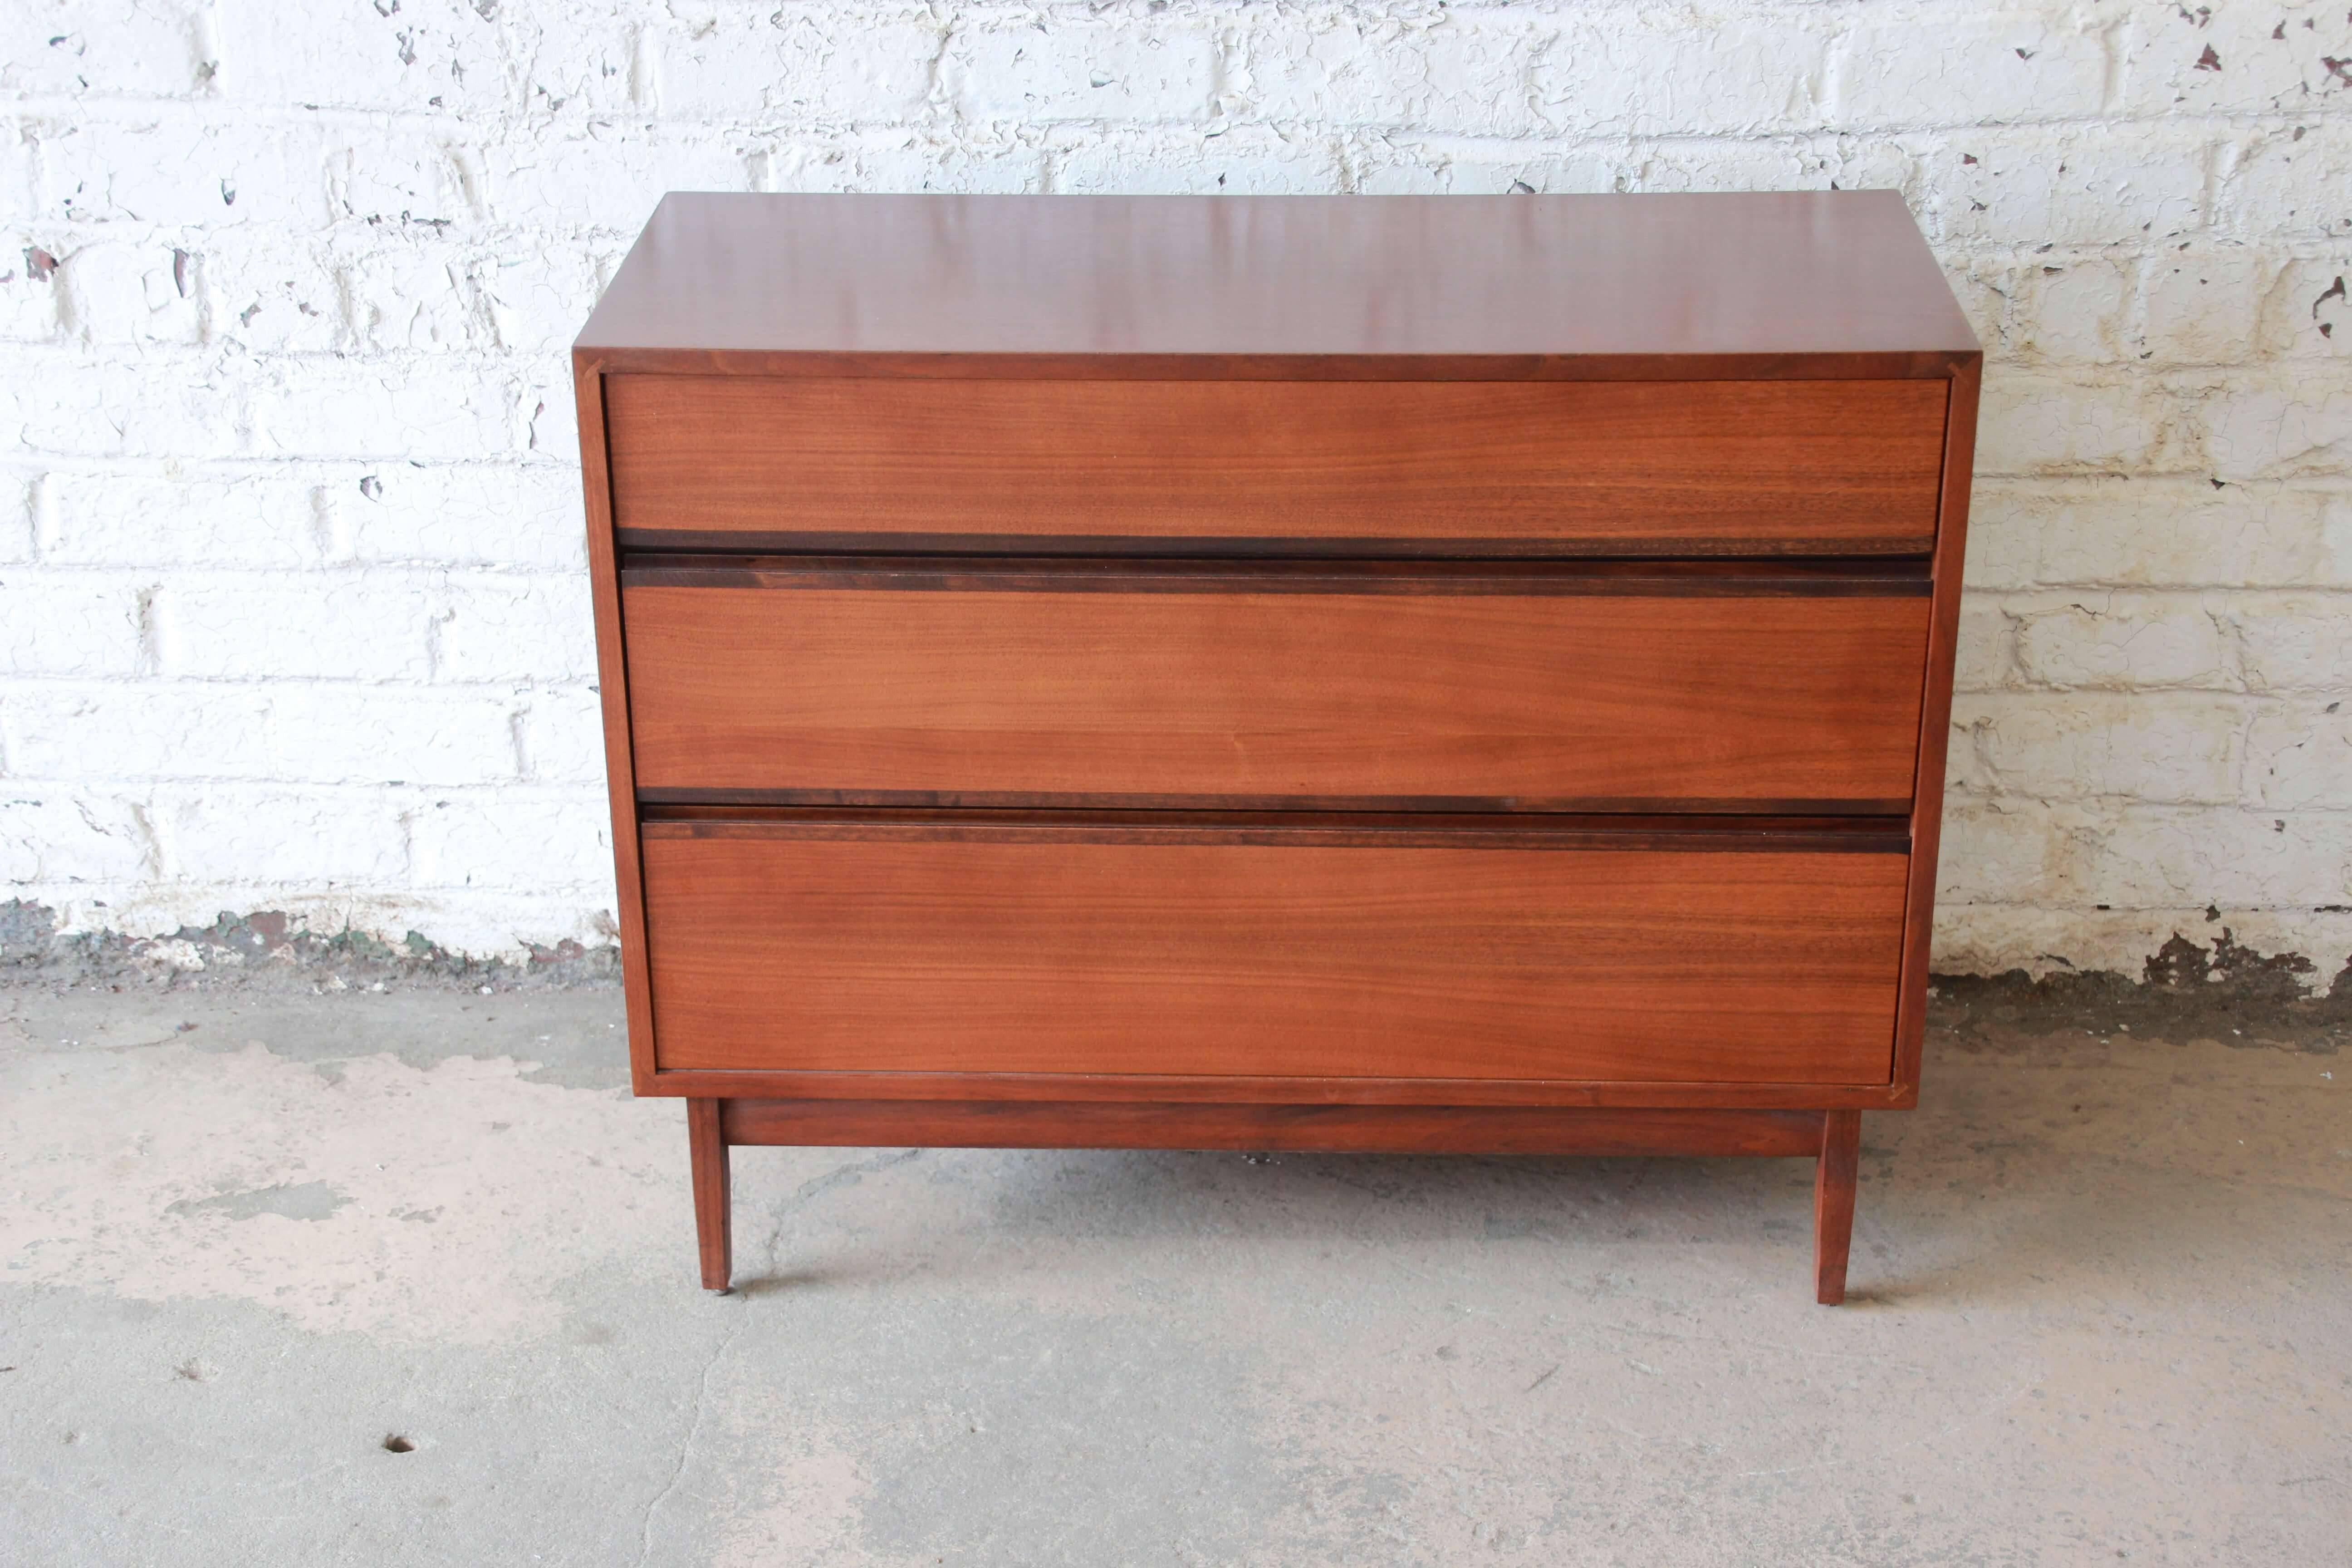 Offering a very nice Kipp Stewart for Calvin Furniture dresser chest. The chest has a nice ebonized sculpted pulls that open up to drawers with dividers that offer ample storage and organization. The dresser is great vintage condition with minor